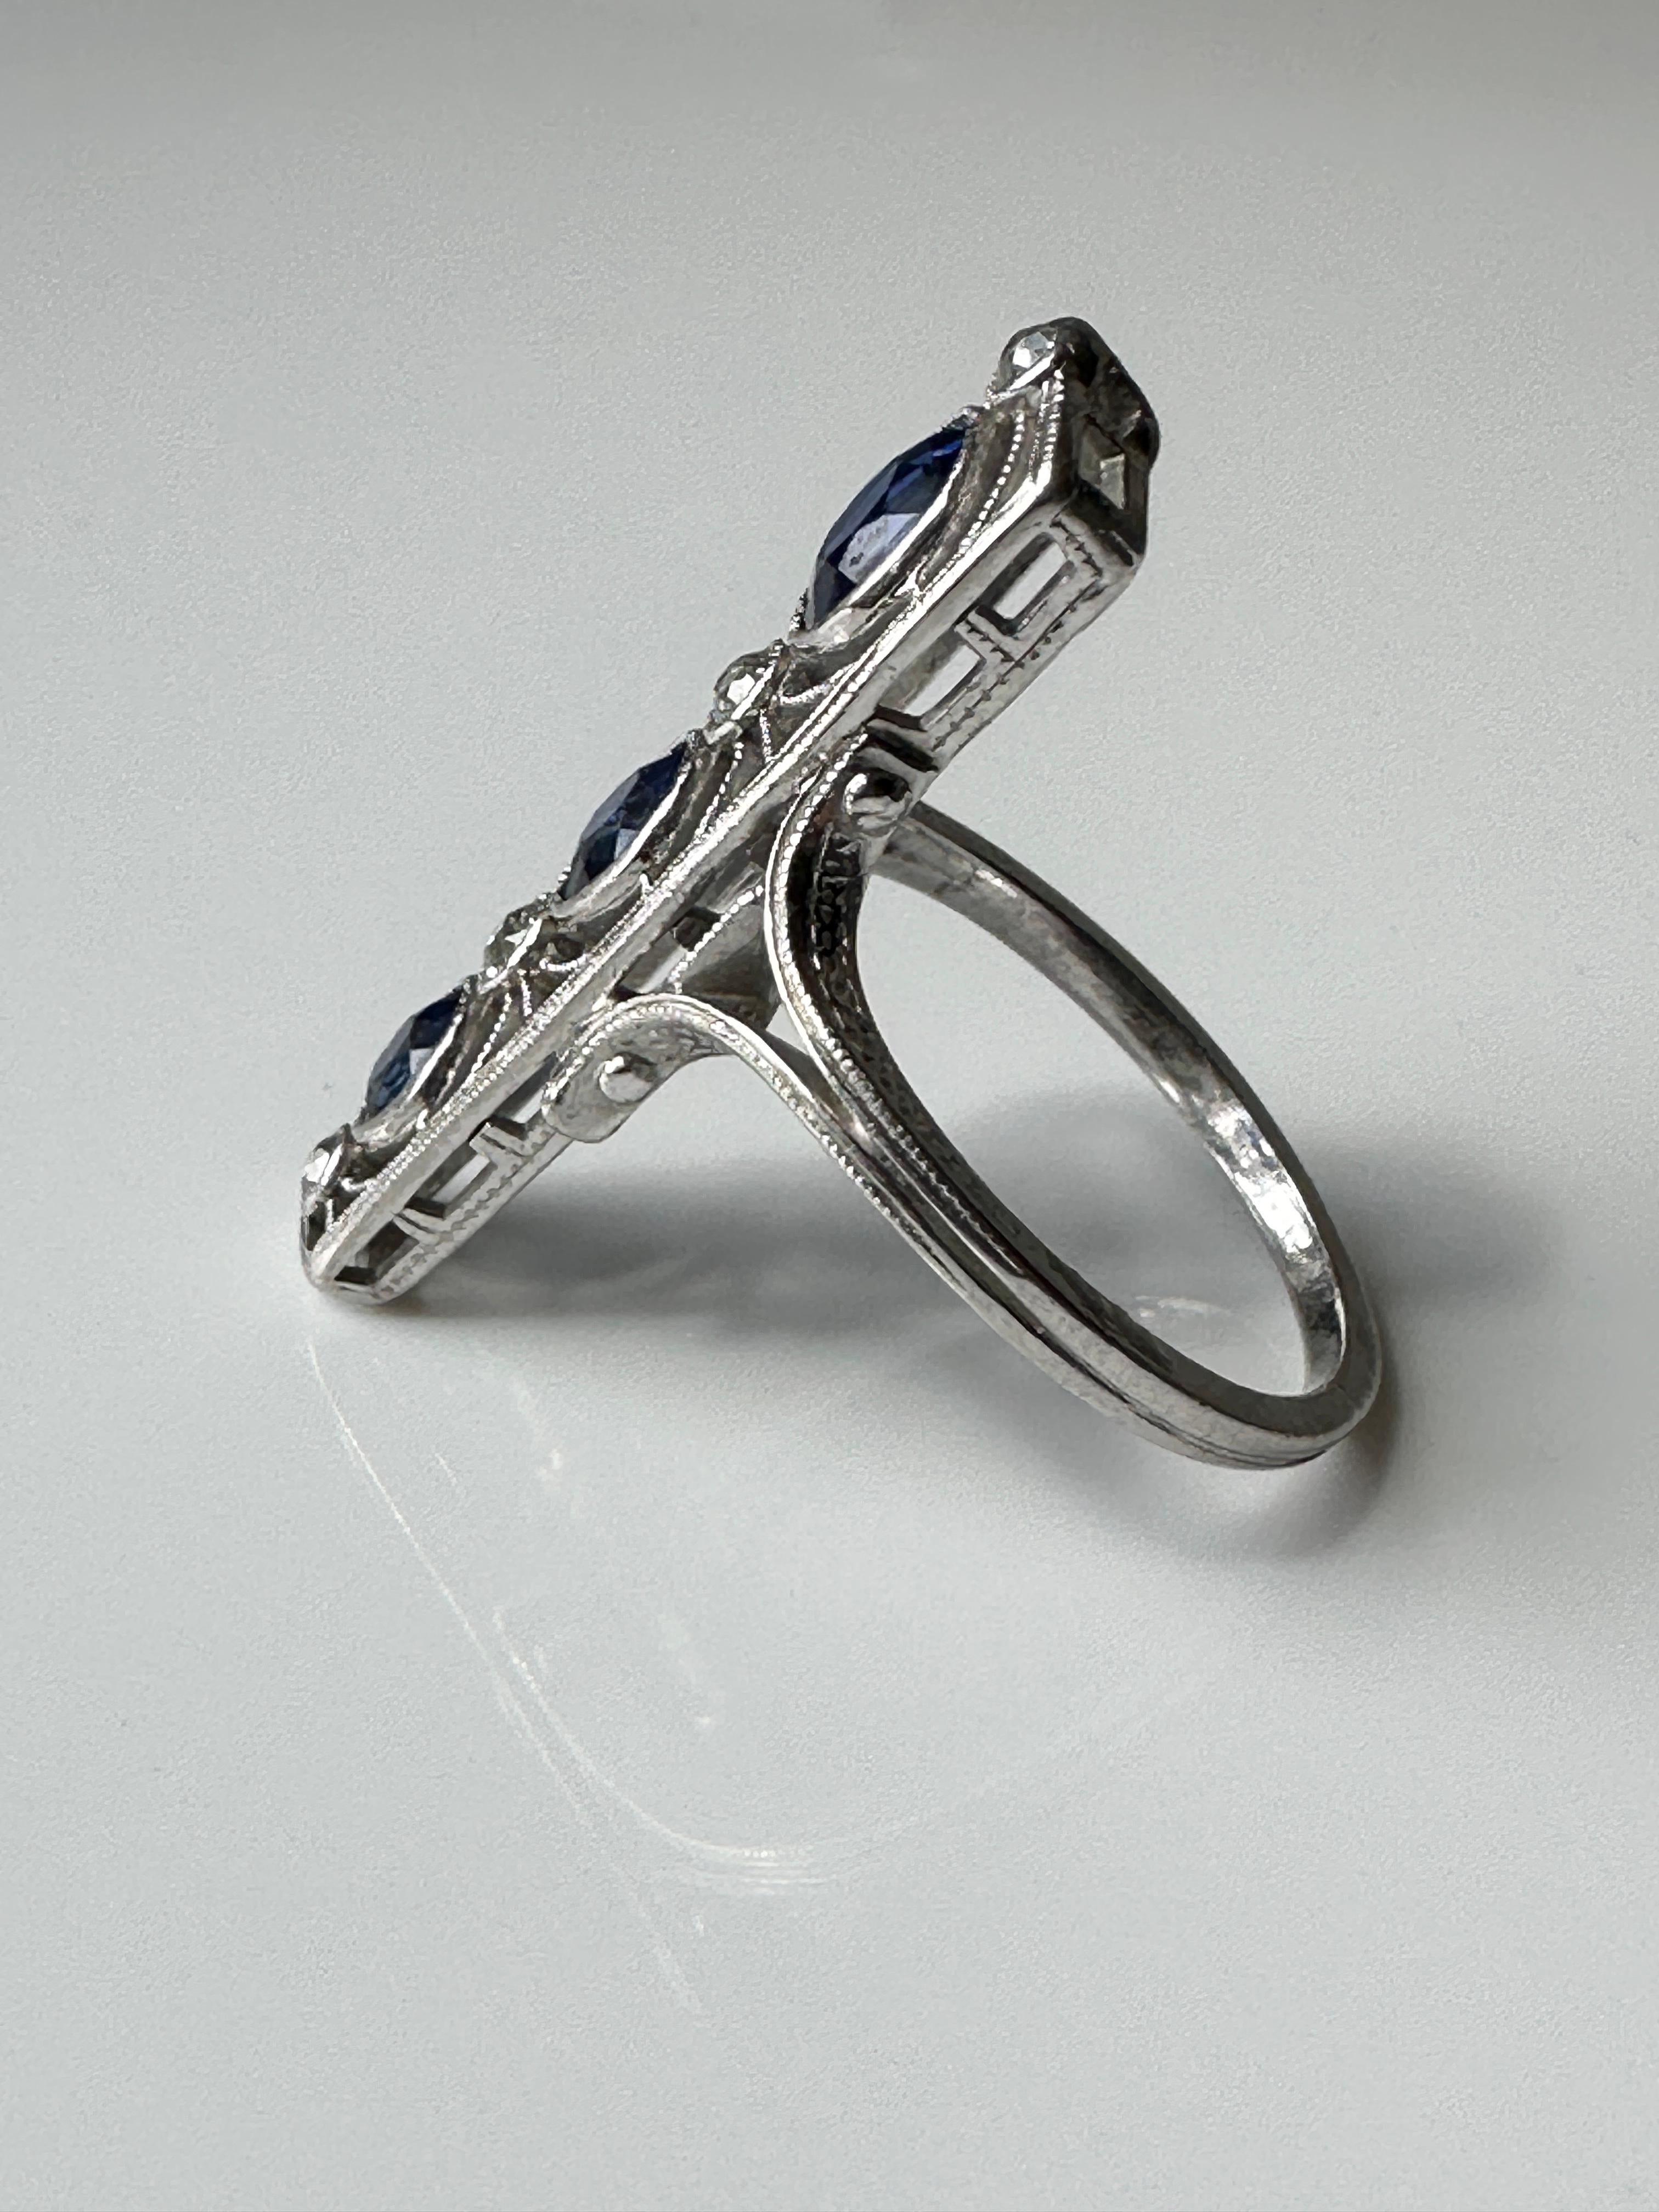 Late Edwardian Sapphire and Diamond Elongated Ring In Good Condition For Sale In Hummelstown, PA